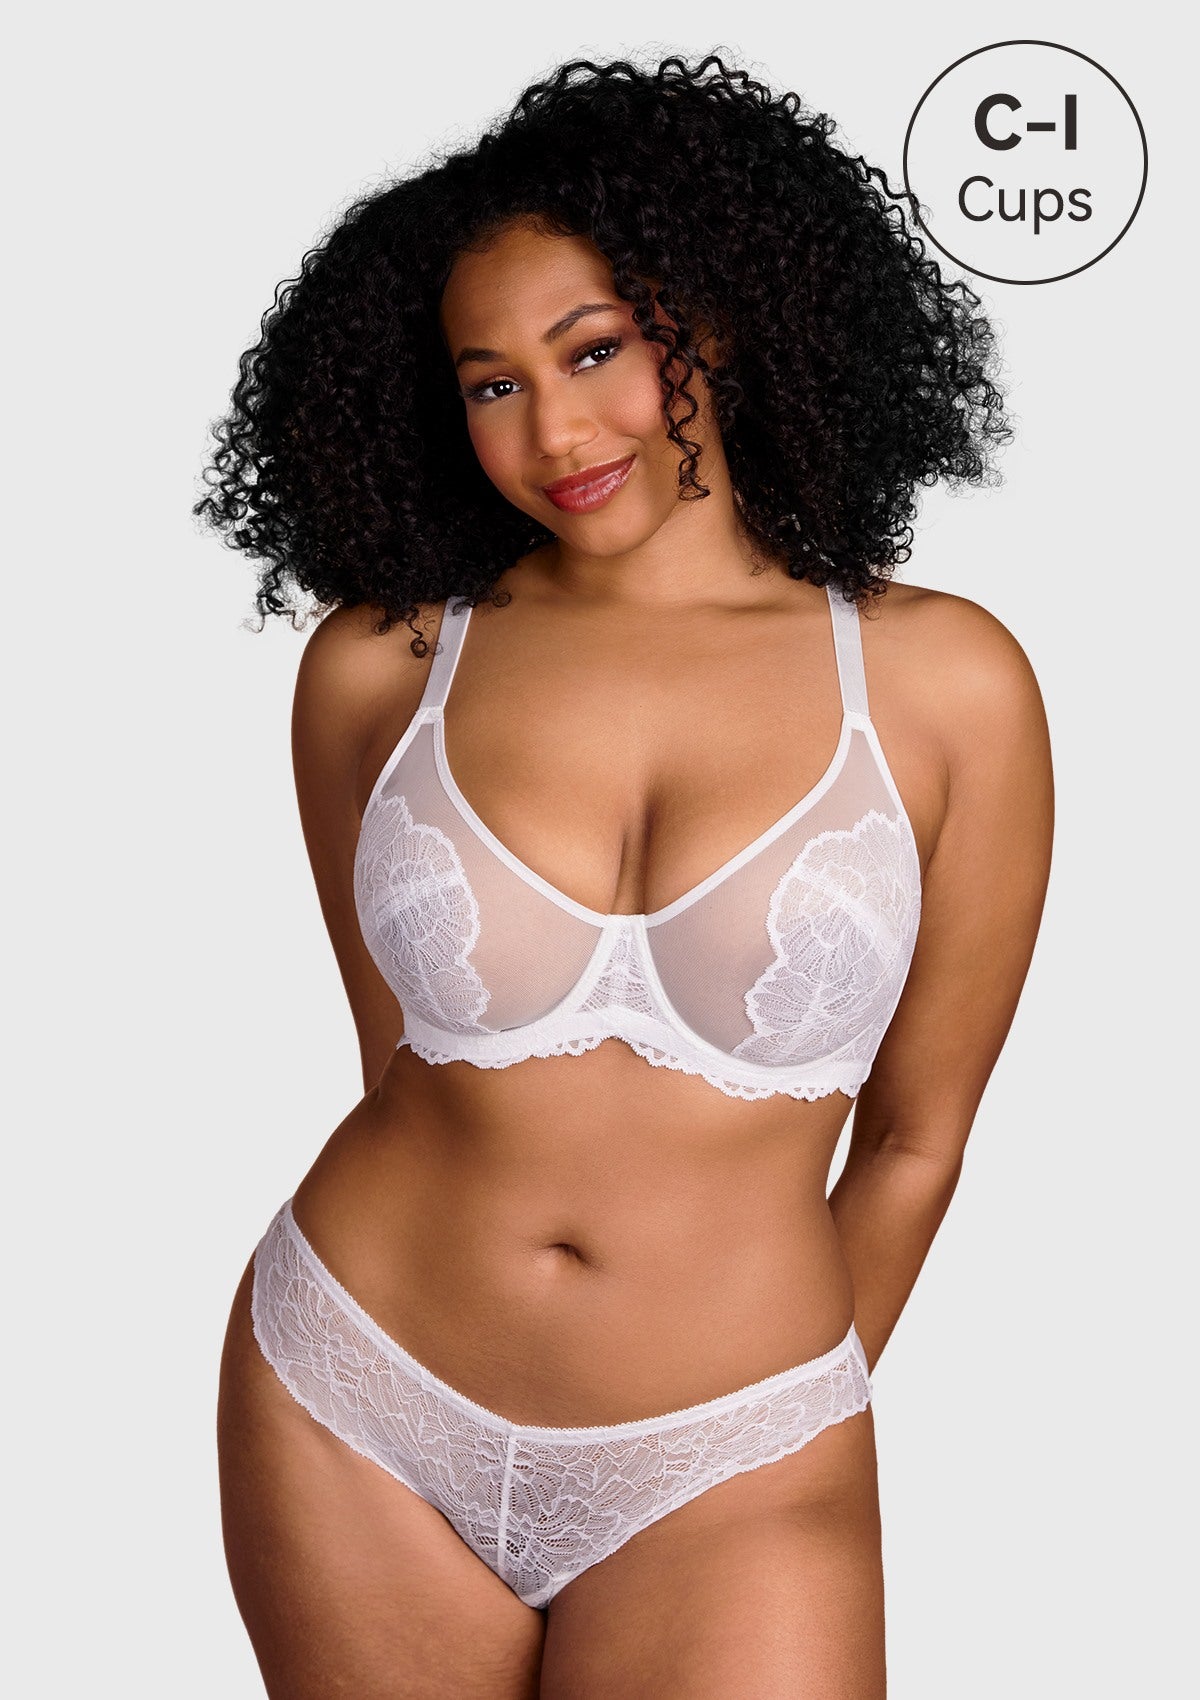 HSIA Blossom Bestseller Unlined Underwire Lace Bra - White / 40 / D